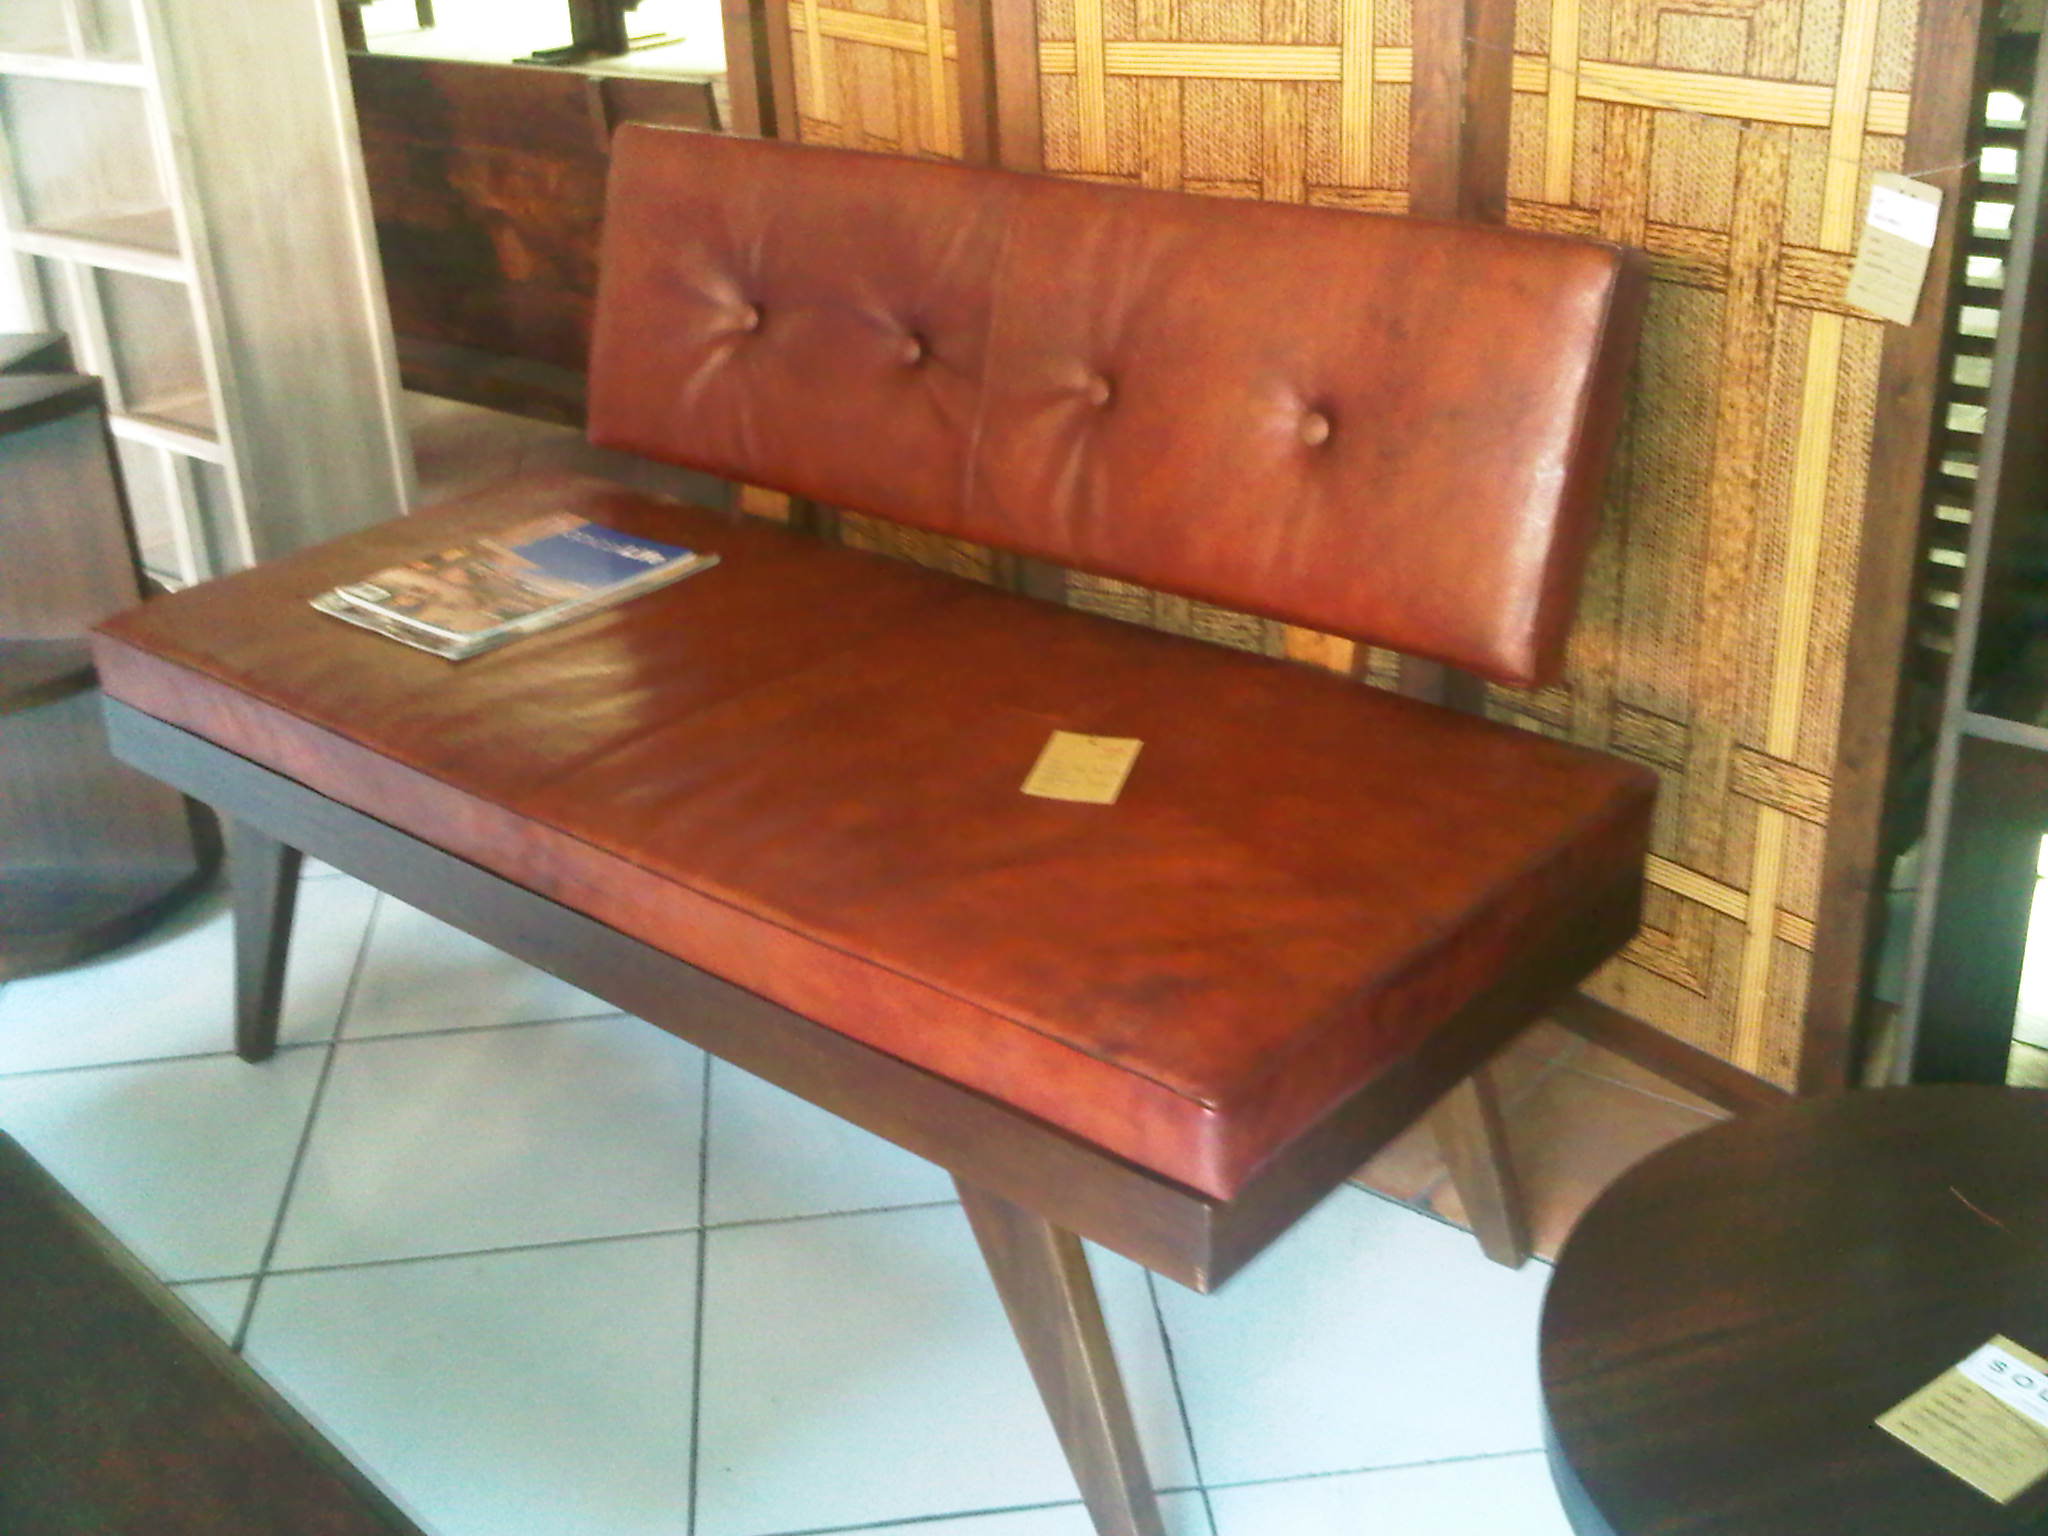 Bench teak wood with leather